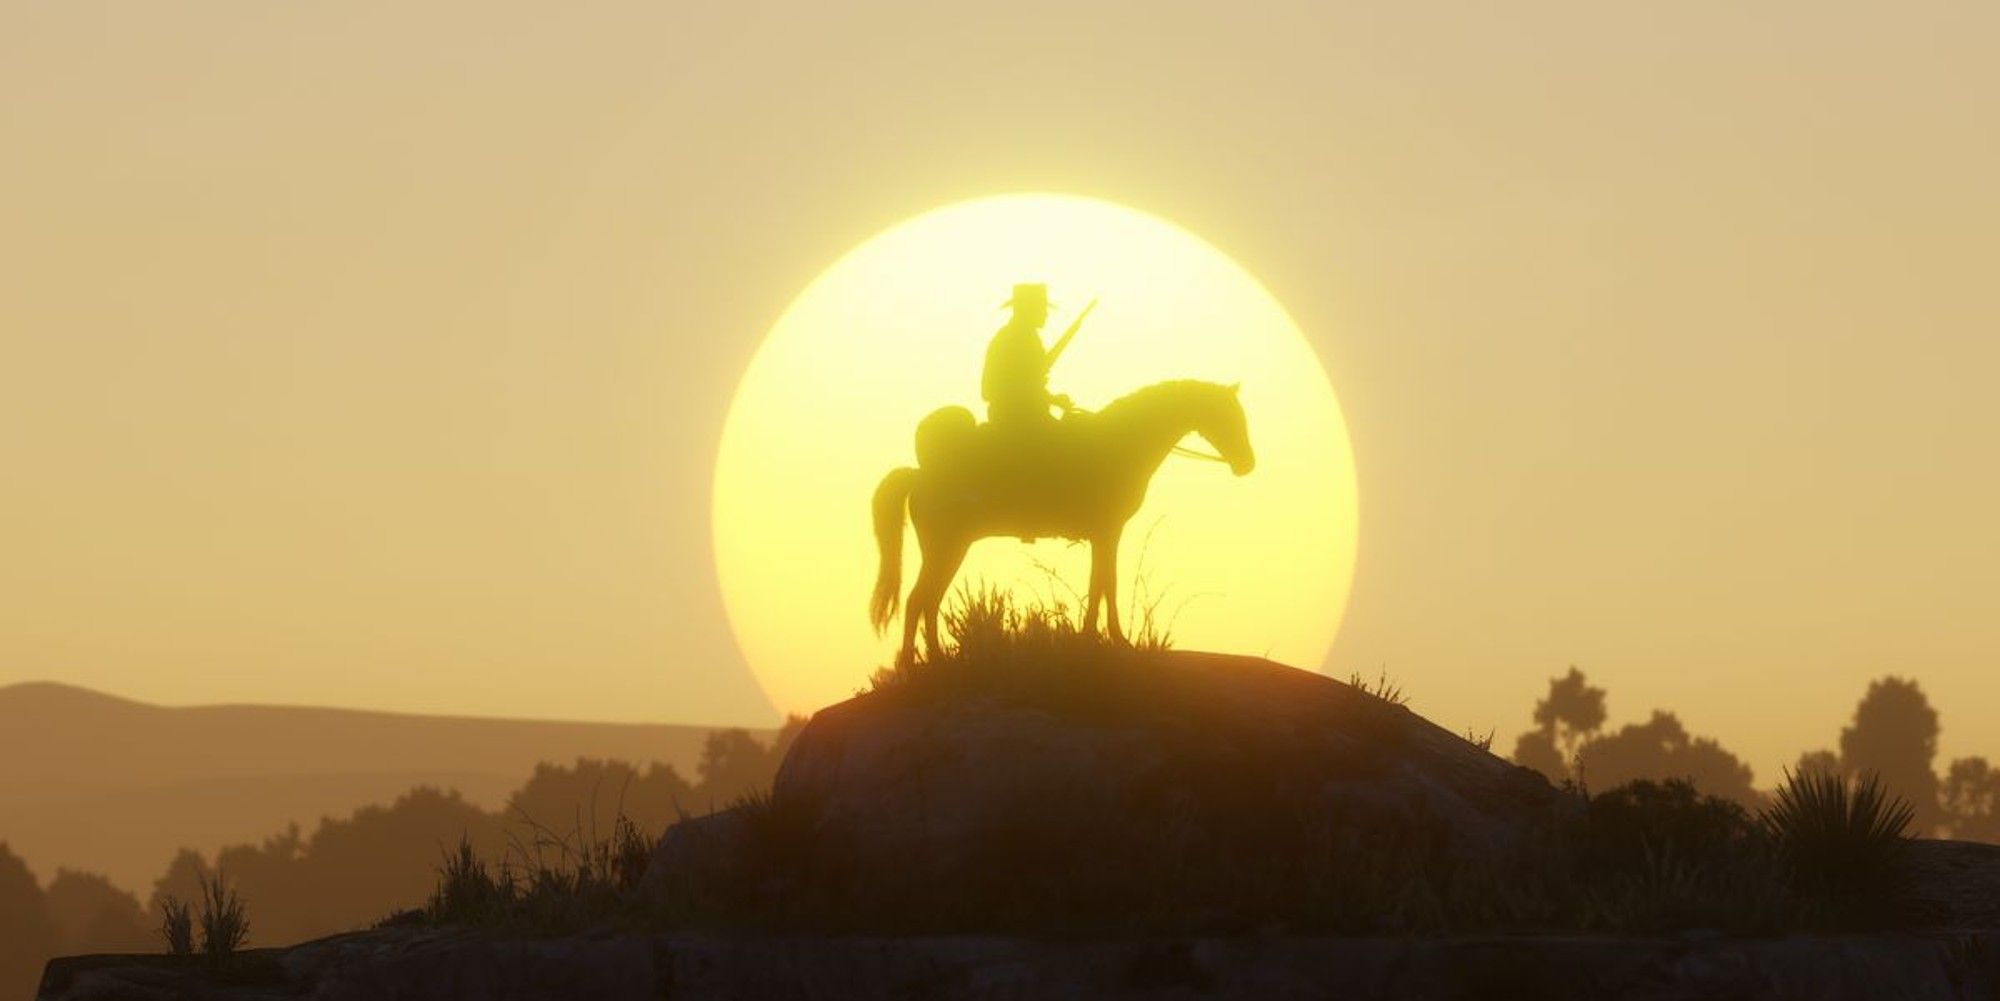 red-dead-redemption-2-cracks-the-top-ten-bestselling-games-of-all-time-pokemonwe